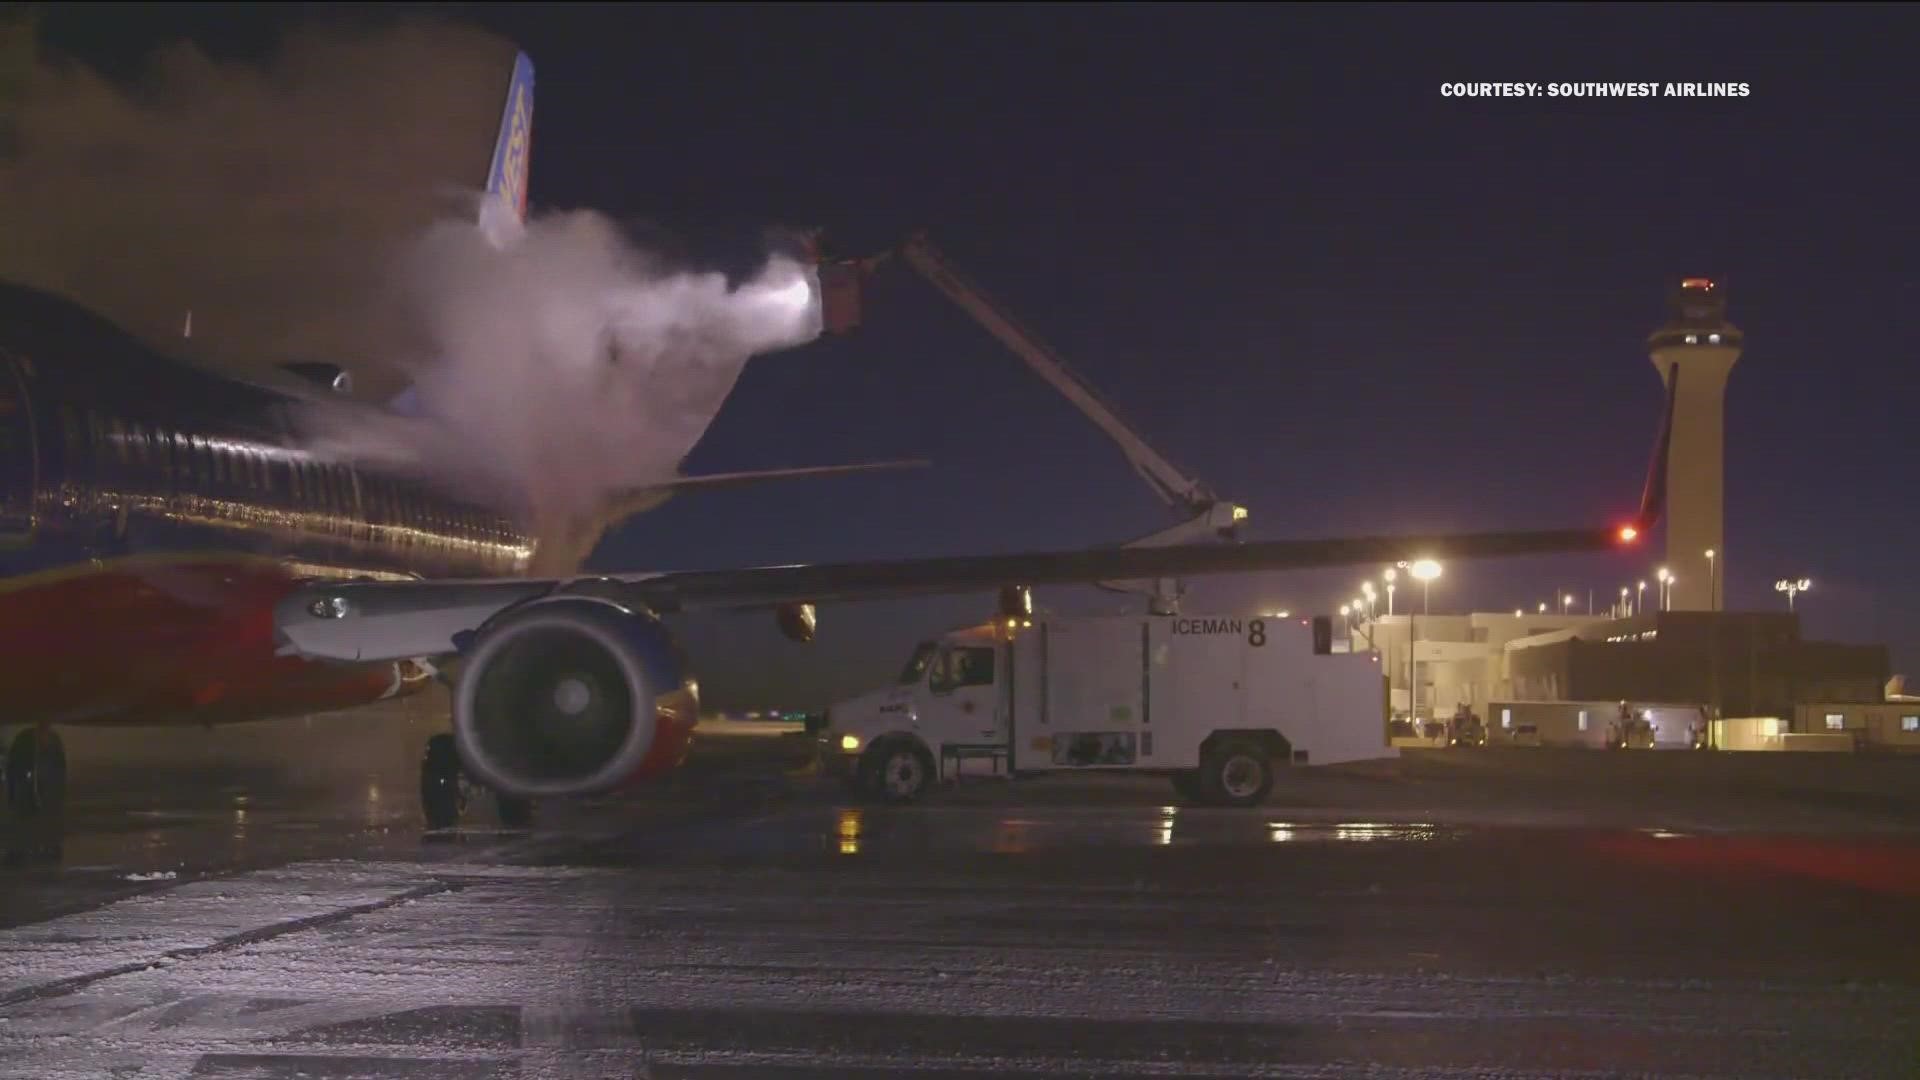 Ice accumulation can keep planes from being able to take off, resulting in delays and cancelations. Here's how airport crews try to deal with it.